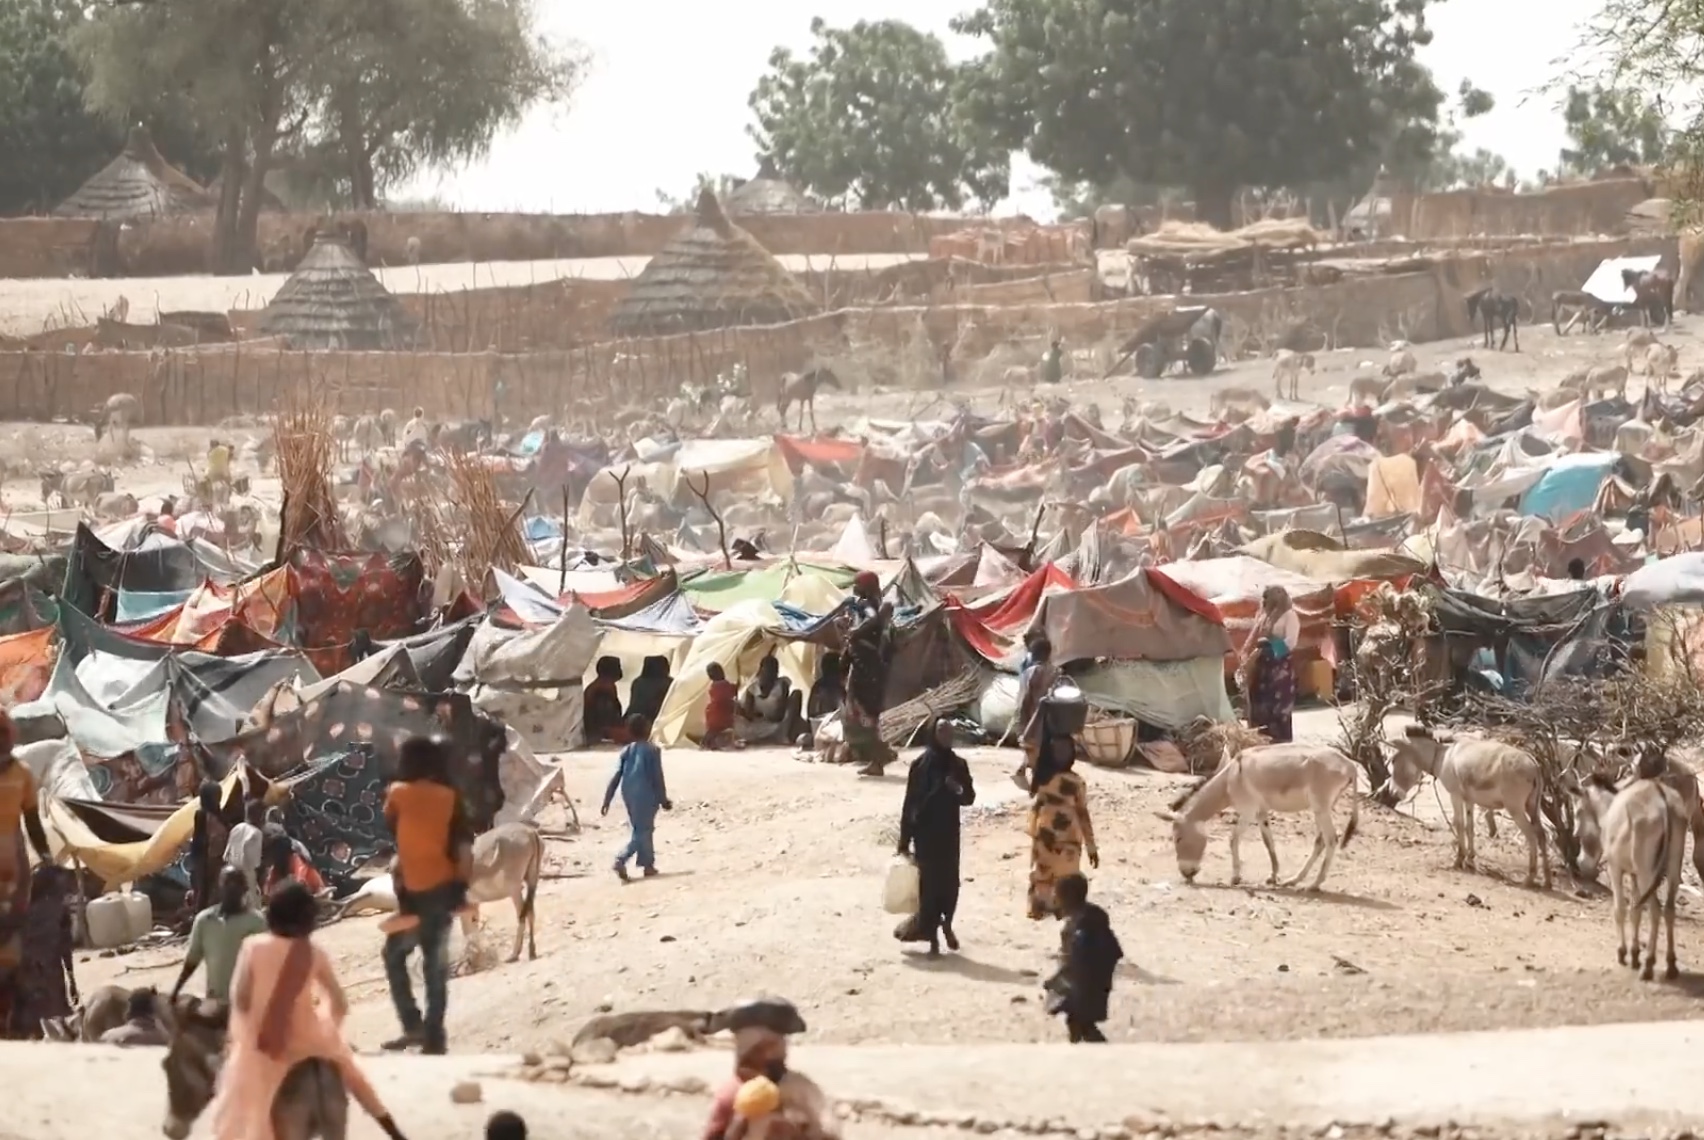 A photograph of a refugee camp for displaced Sudanese in neighboring Chad (Henry Wilkins/VOA via Wikimedia Commons)